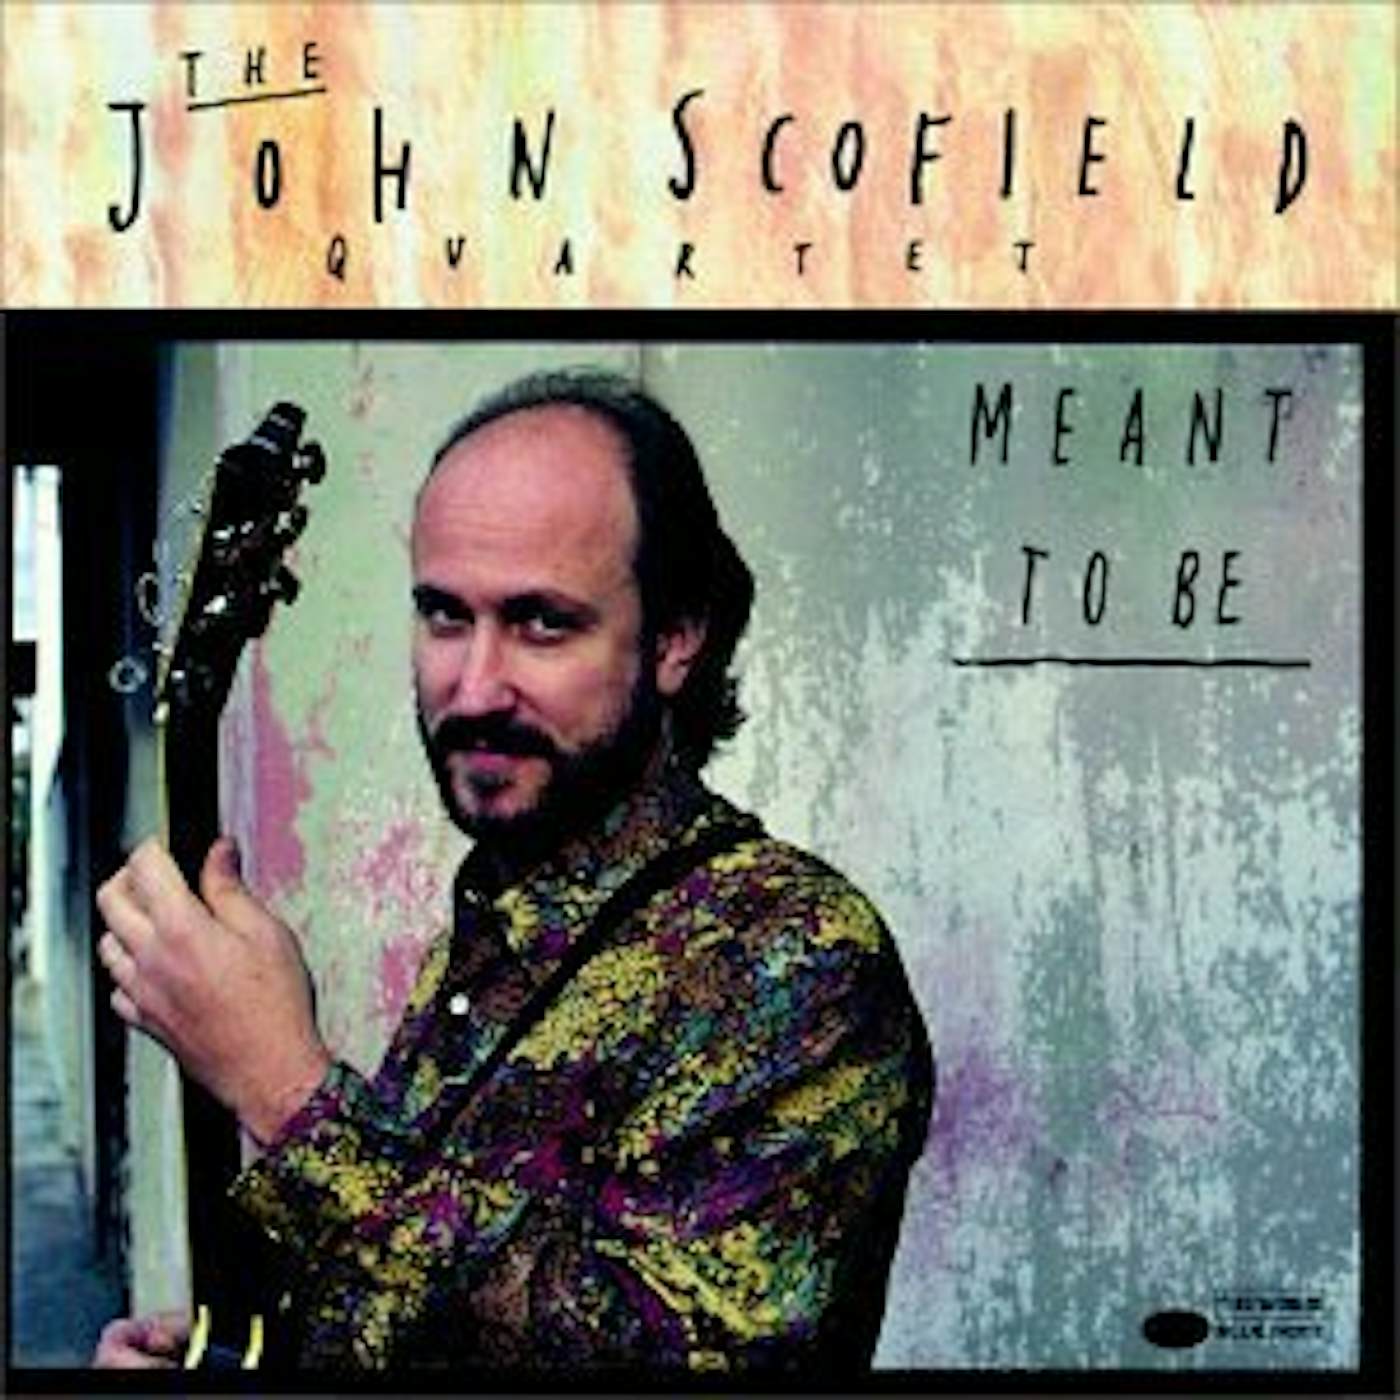 John Scofield MEANT TO BE CD